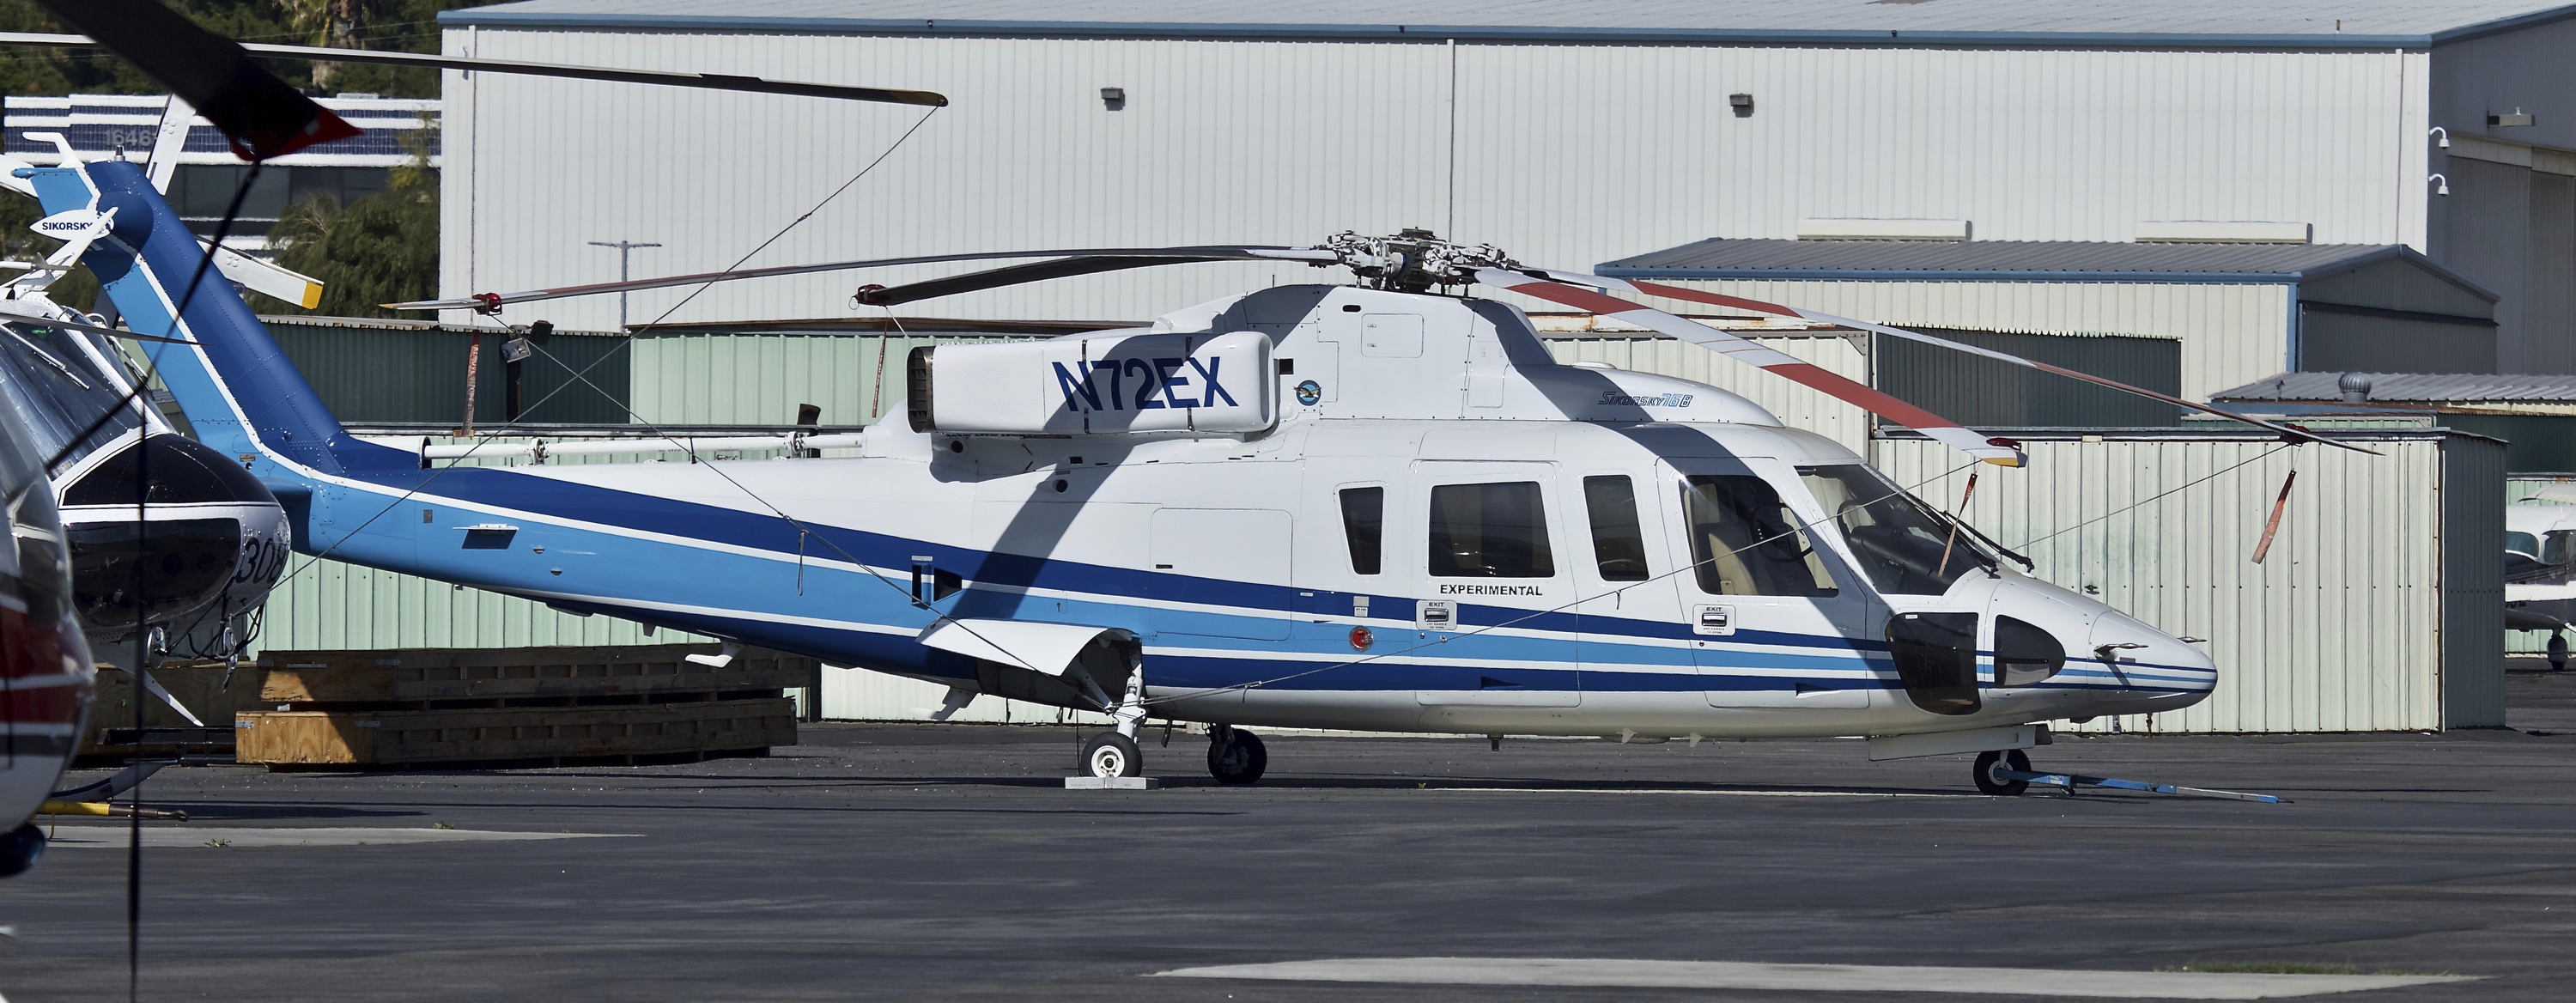 Photo of a Sikorsky S-76B helicopter at Van Nuys Airport in  California. NBA legend Kobe Bryant, his 13-year-old daughter and others died after their helicopter, the same type shown in this photo, crashed in Southern California. 